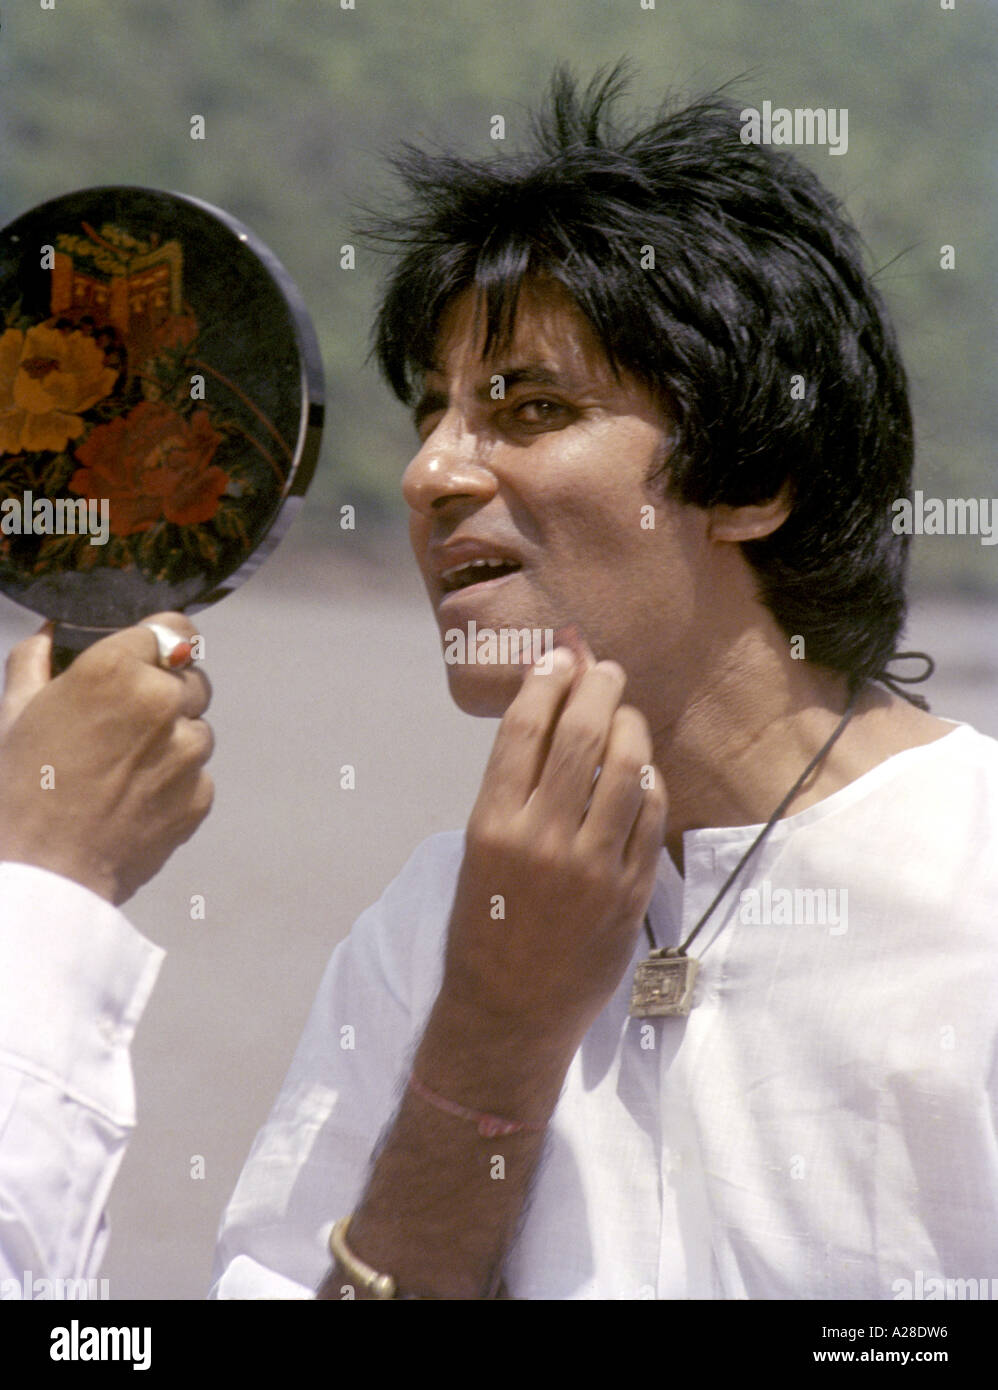 Amitabh Bachchan, Indian Bollywood hindi movie film star actor, applying makeup on film set in India Stock Photo